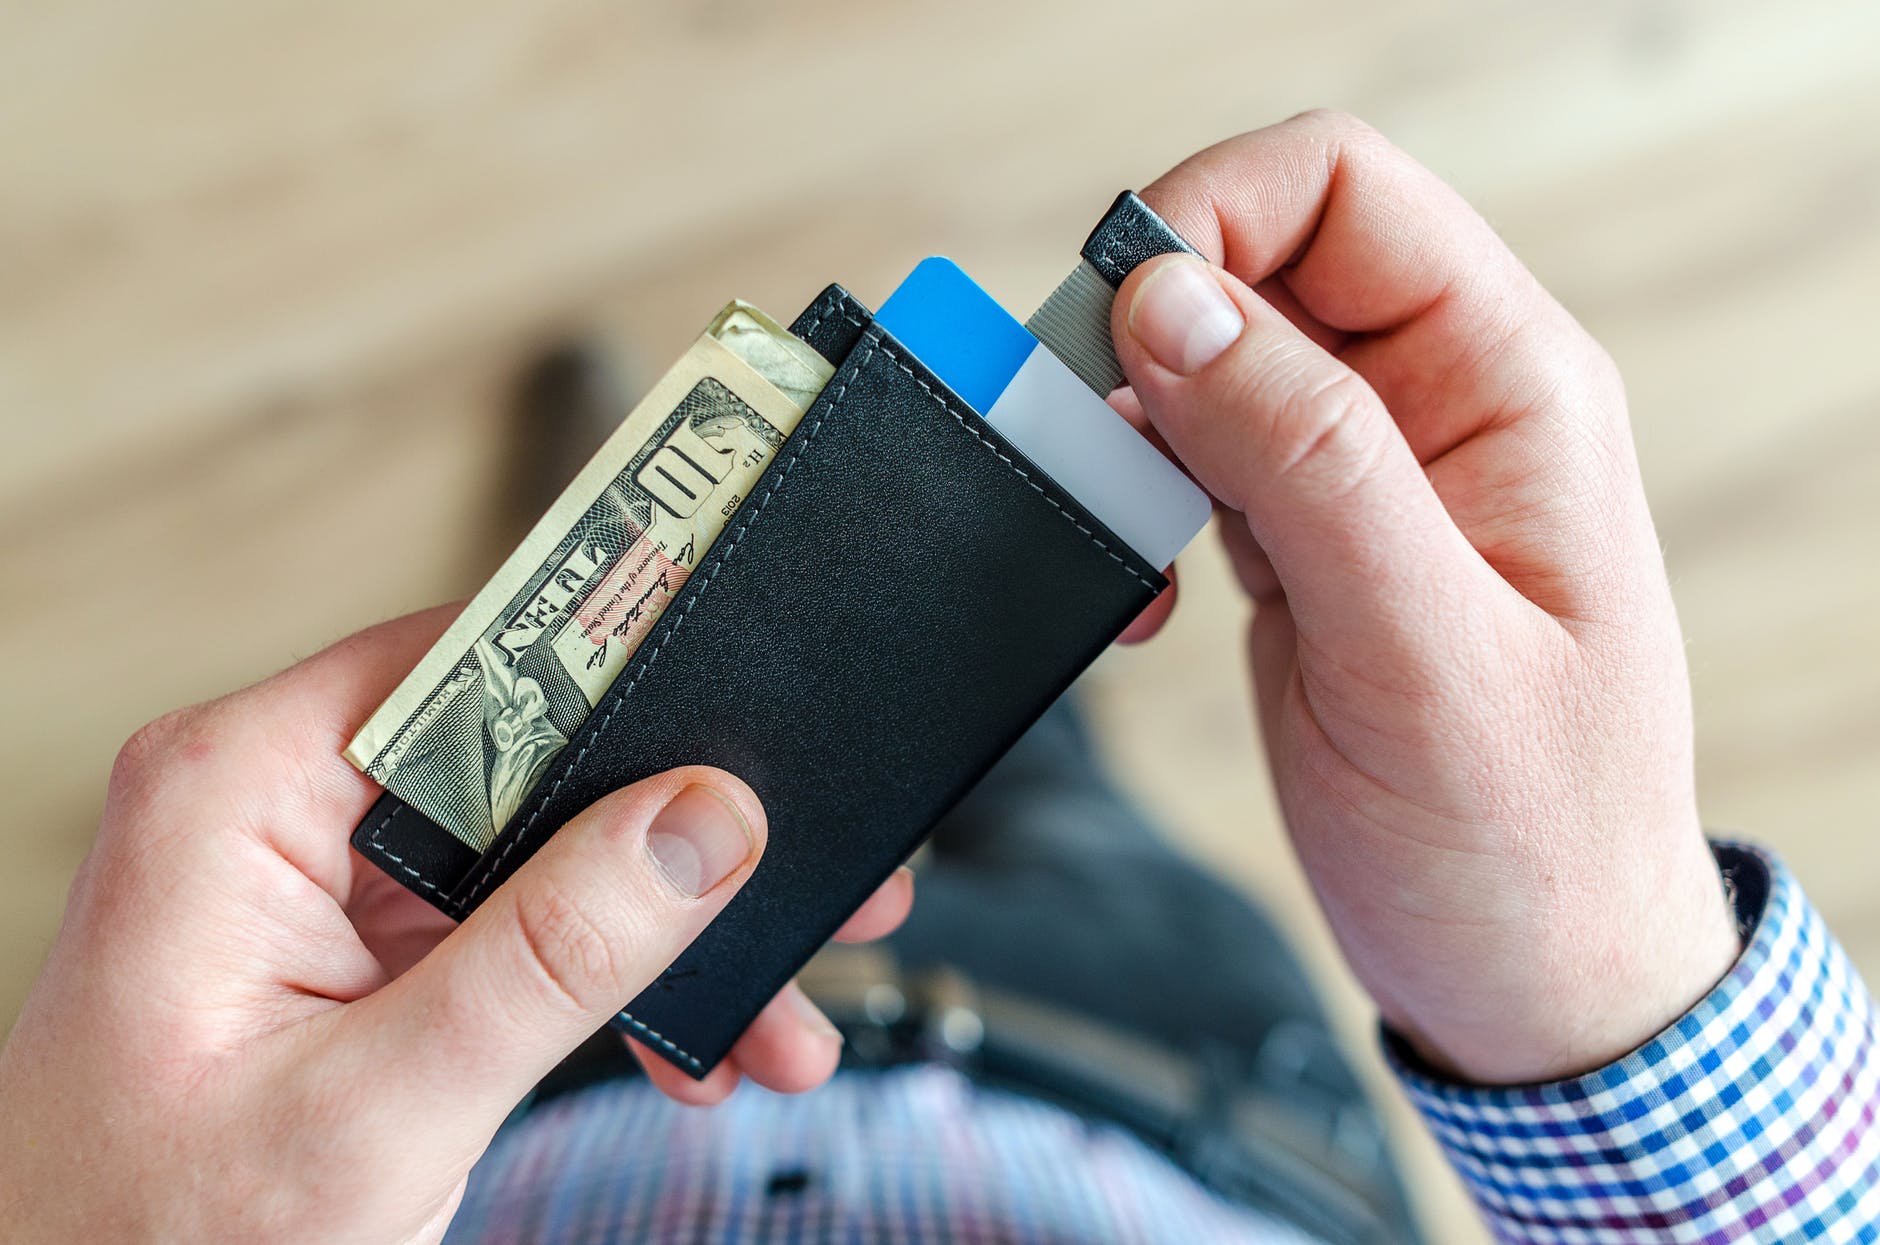 Why should we carry a minimalist wallet